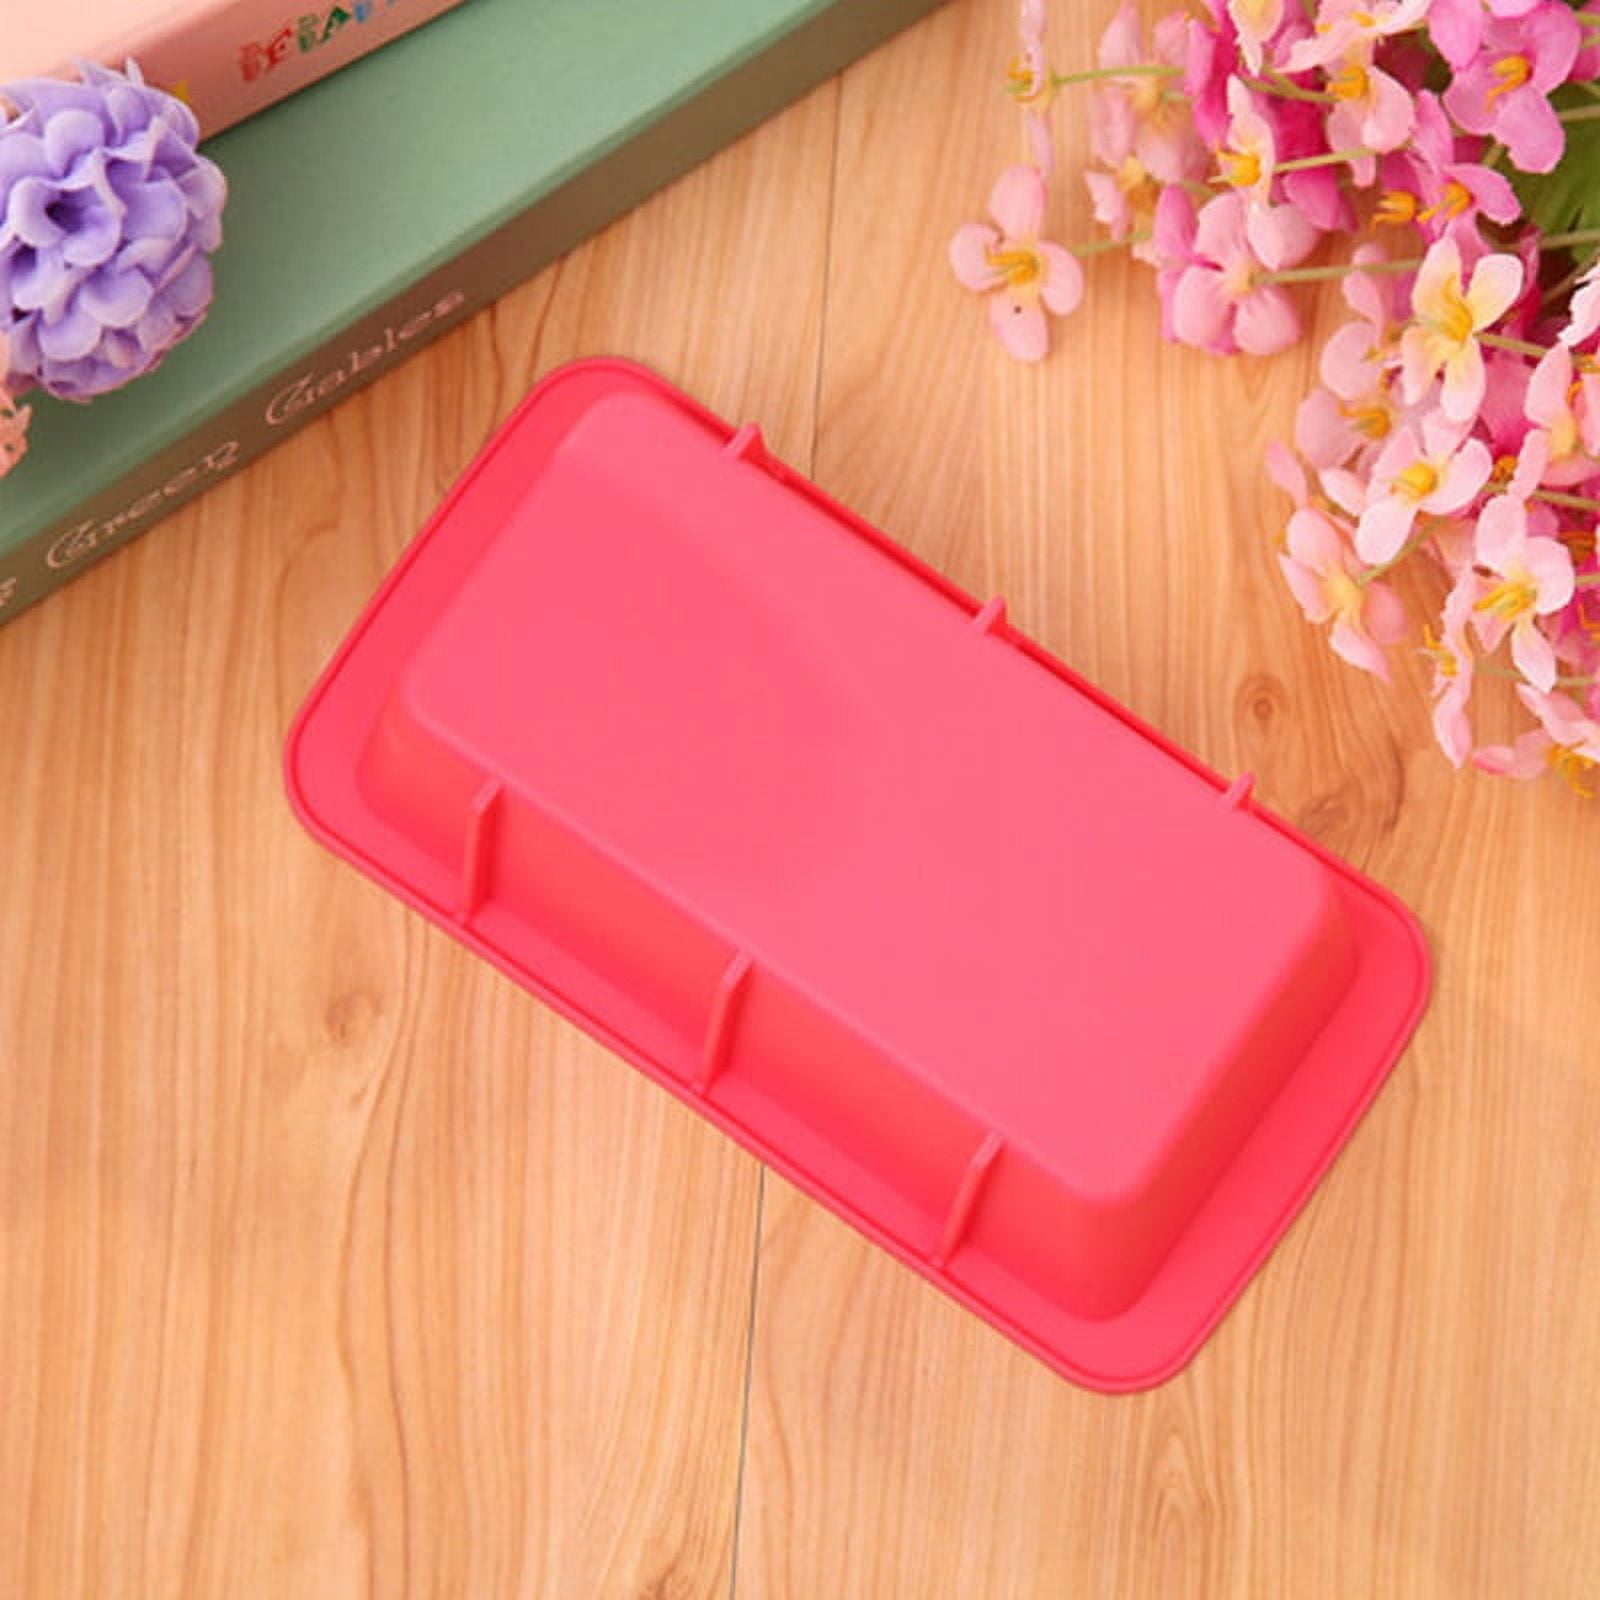 Rectangle Silicone Mould, Cake, Statement, Sculptural, Aesthetic